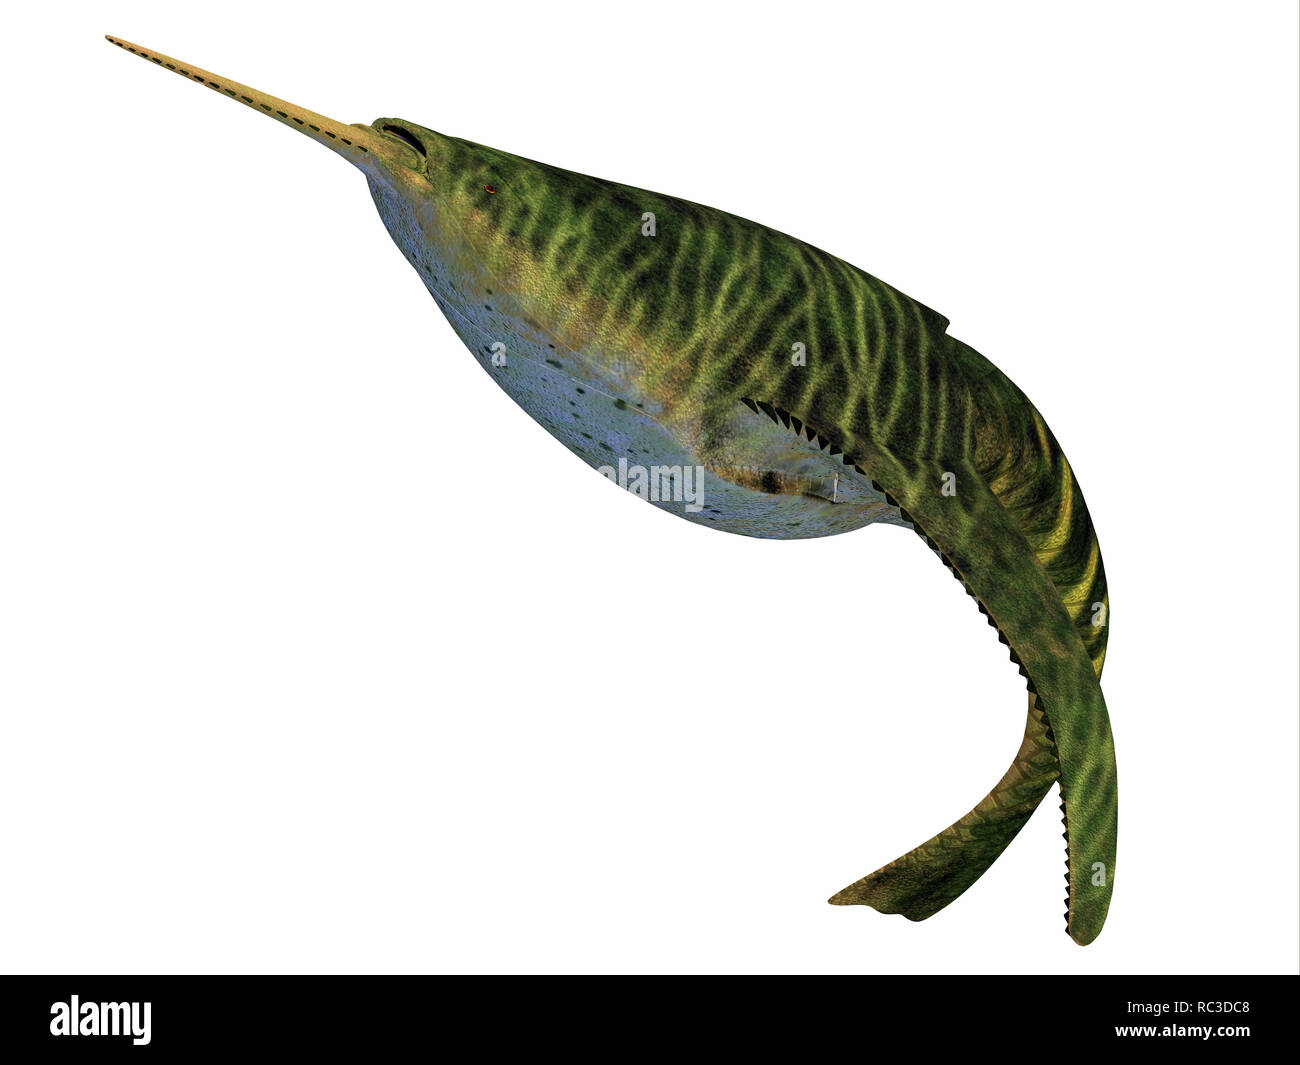 Doryaspis Fish - Doryaspis is an extinct primitive jawless fish that lived in the seas of the early Devonian Period. Stock Photo